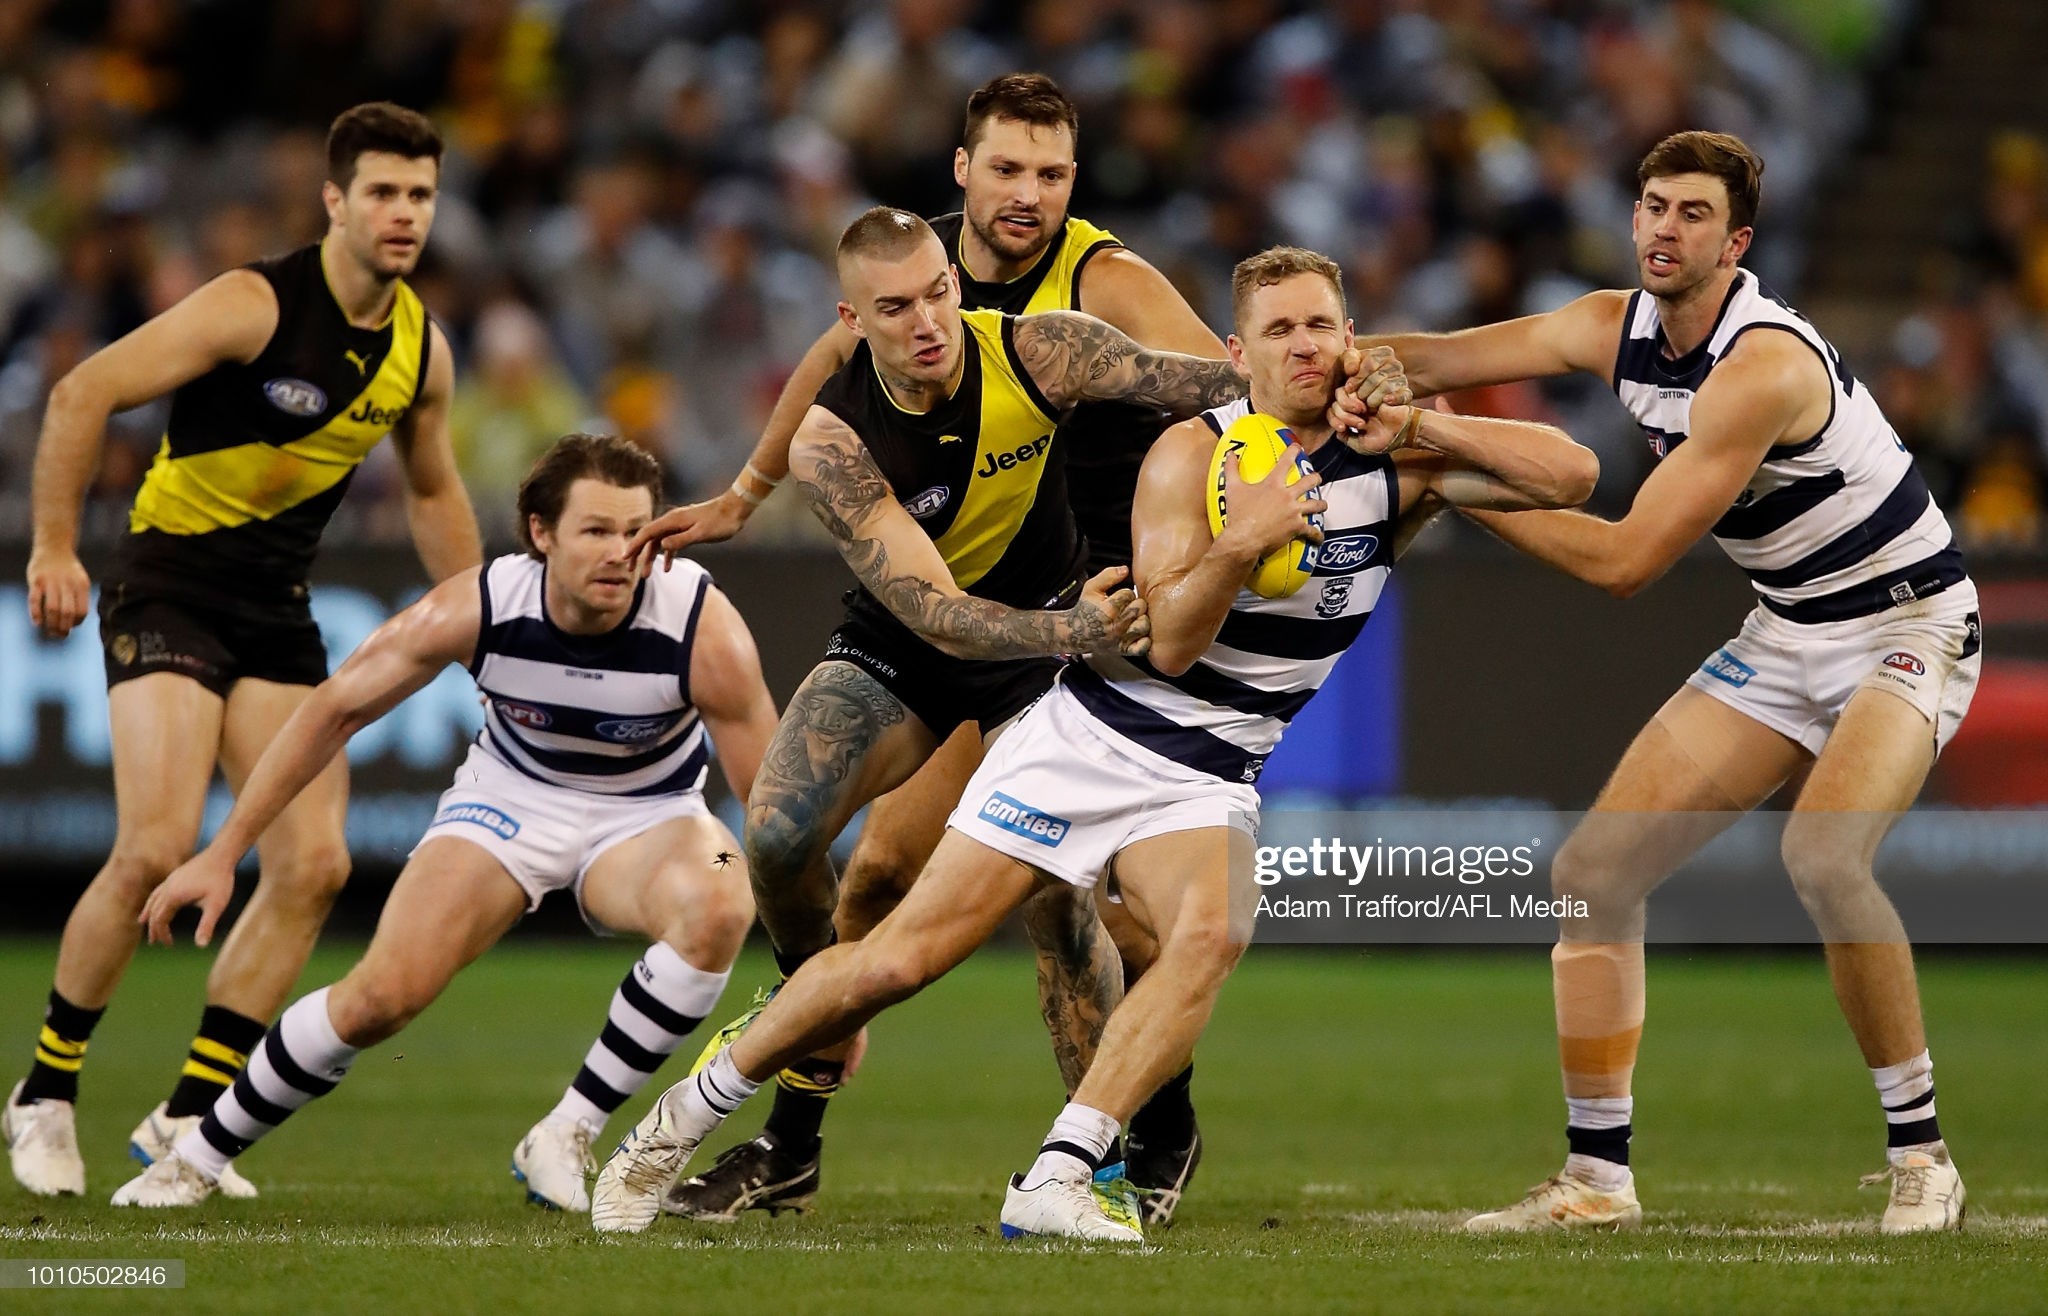 joel-selwood-of-the-cats-is-tackled-high-by-dustin-martin-of-the-of-picture-id1010502846